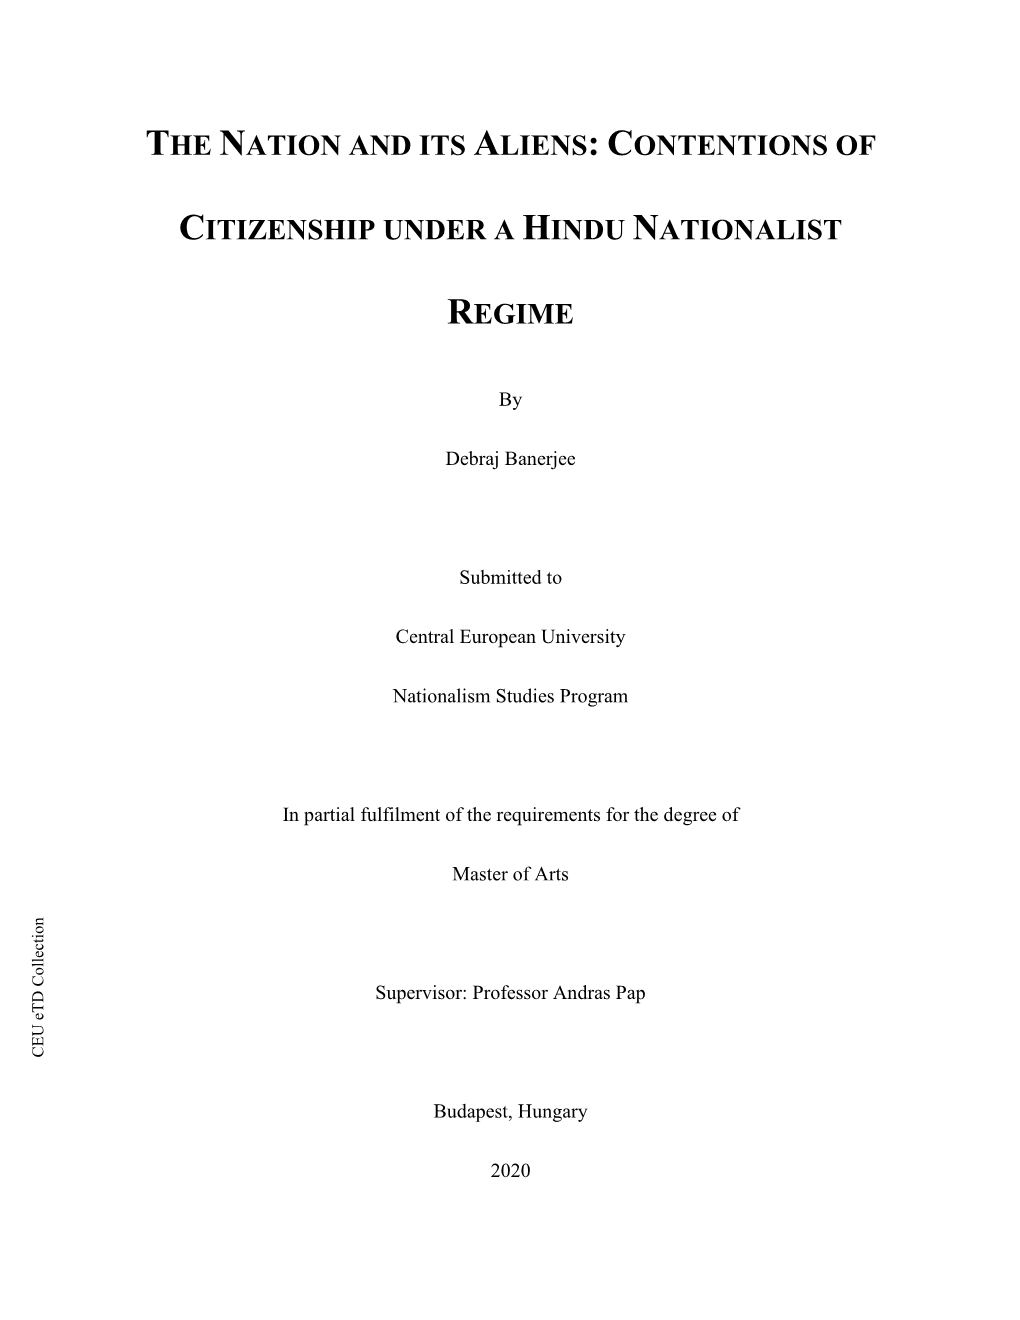 Contentions of Citizenship